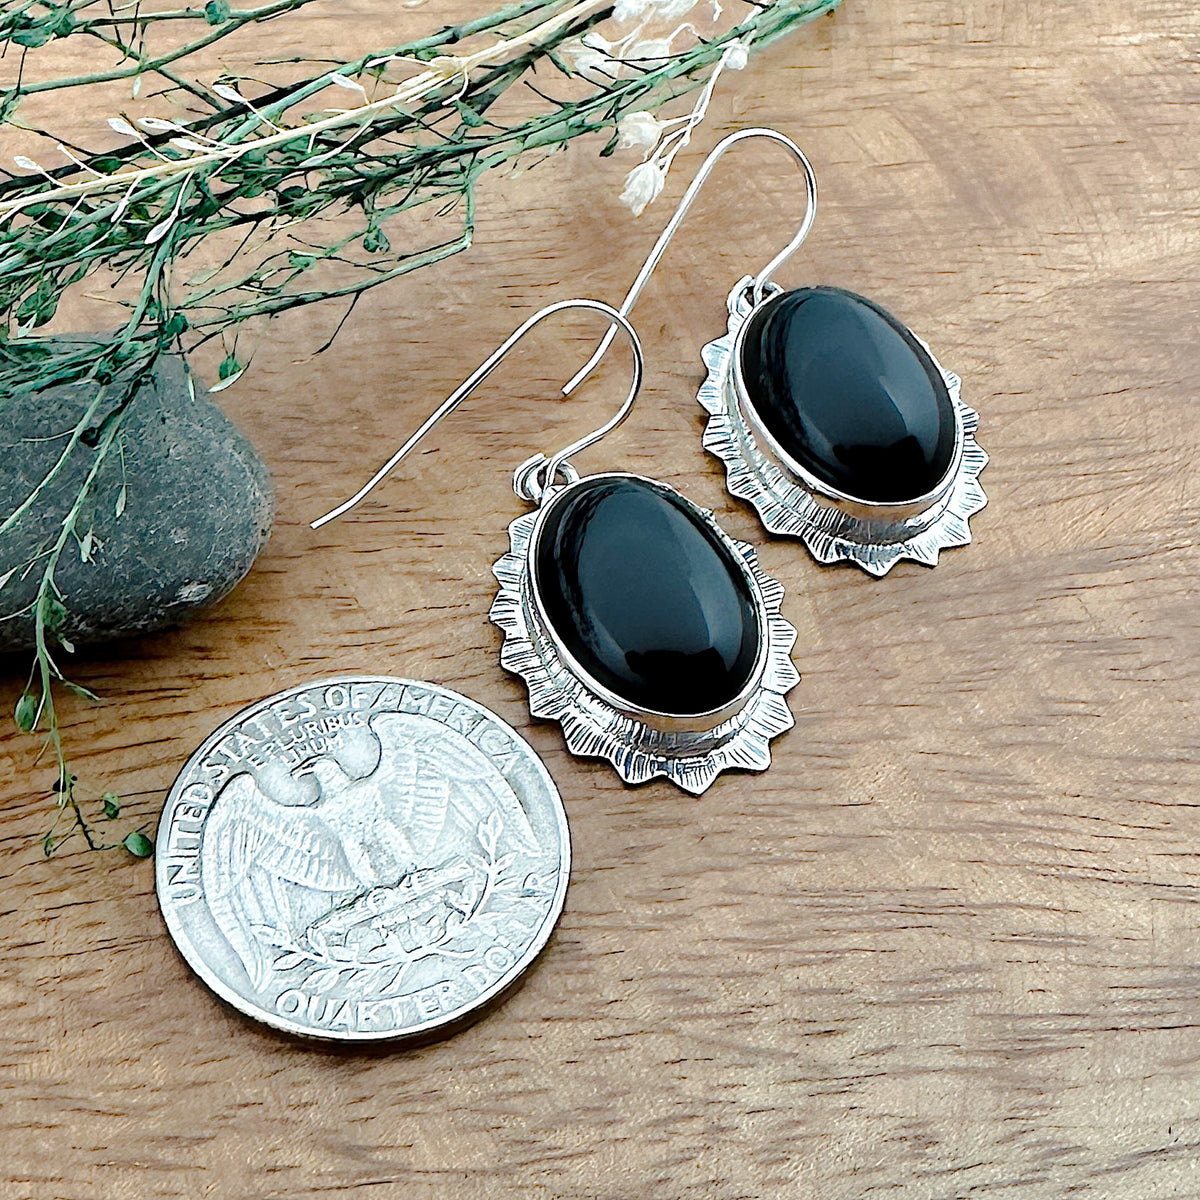 Comparison shot of a US quarter coin and a set of two Black Onyx earrings in an oval shape